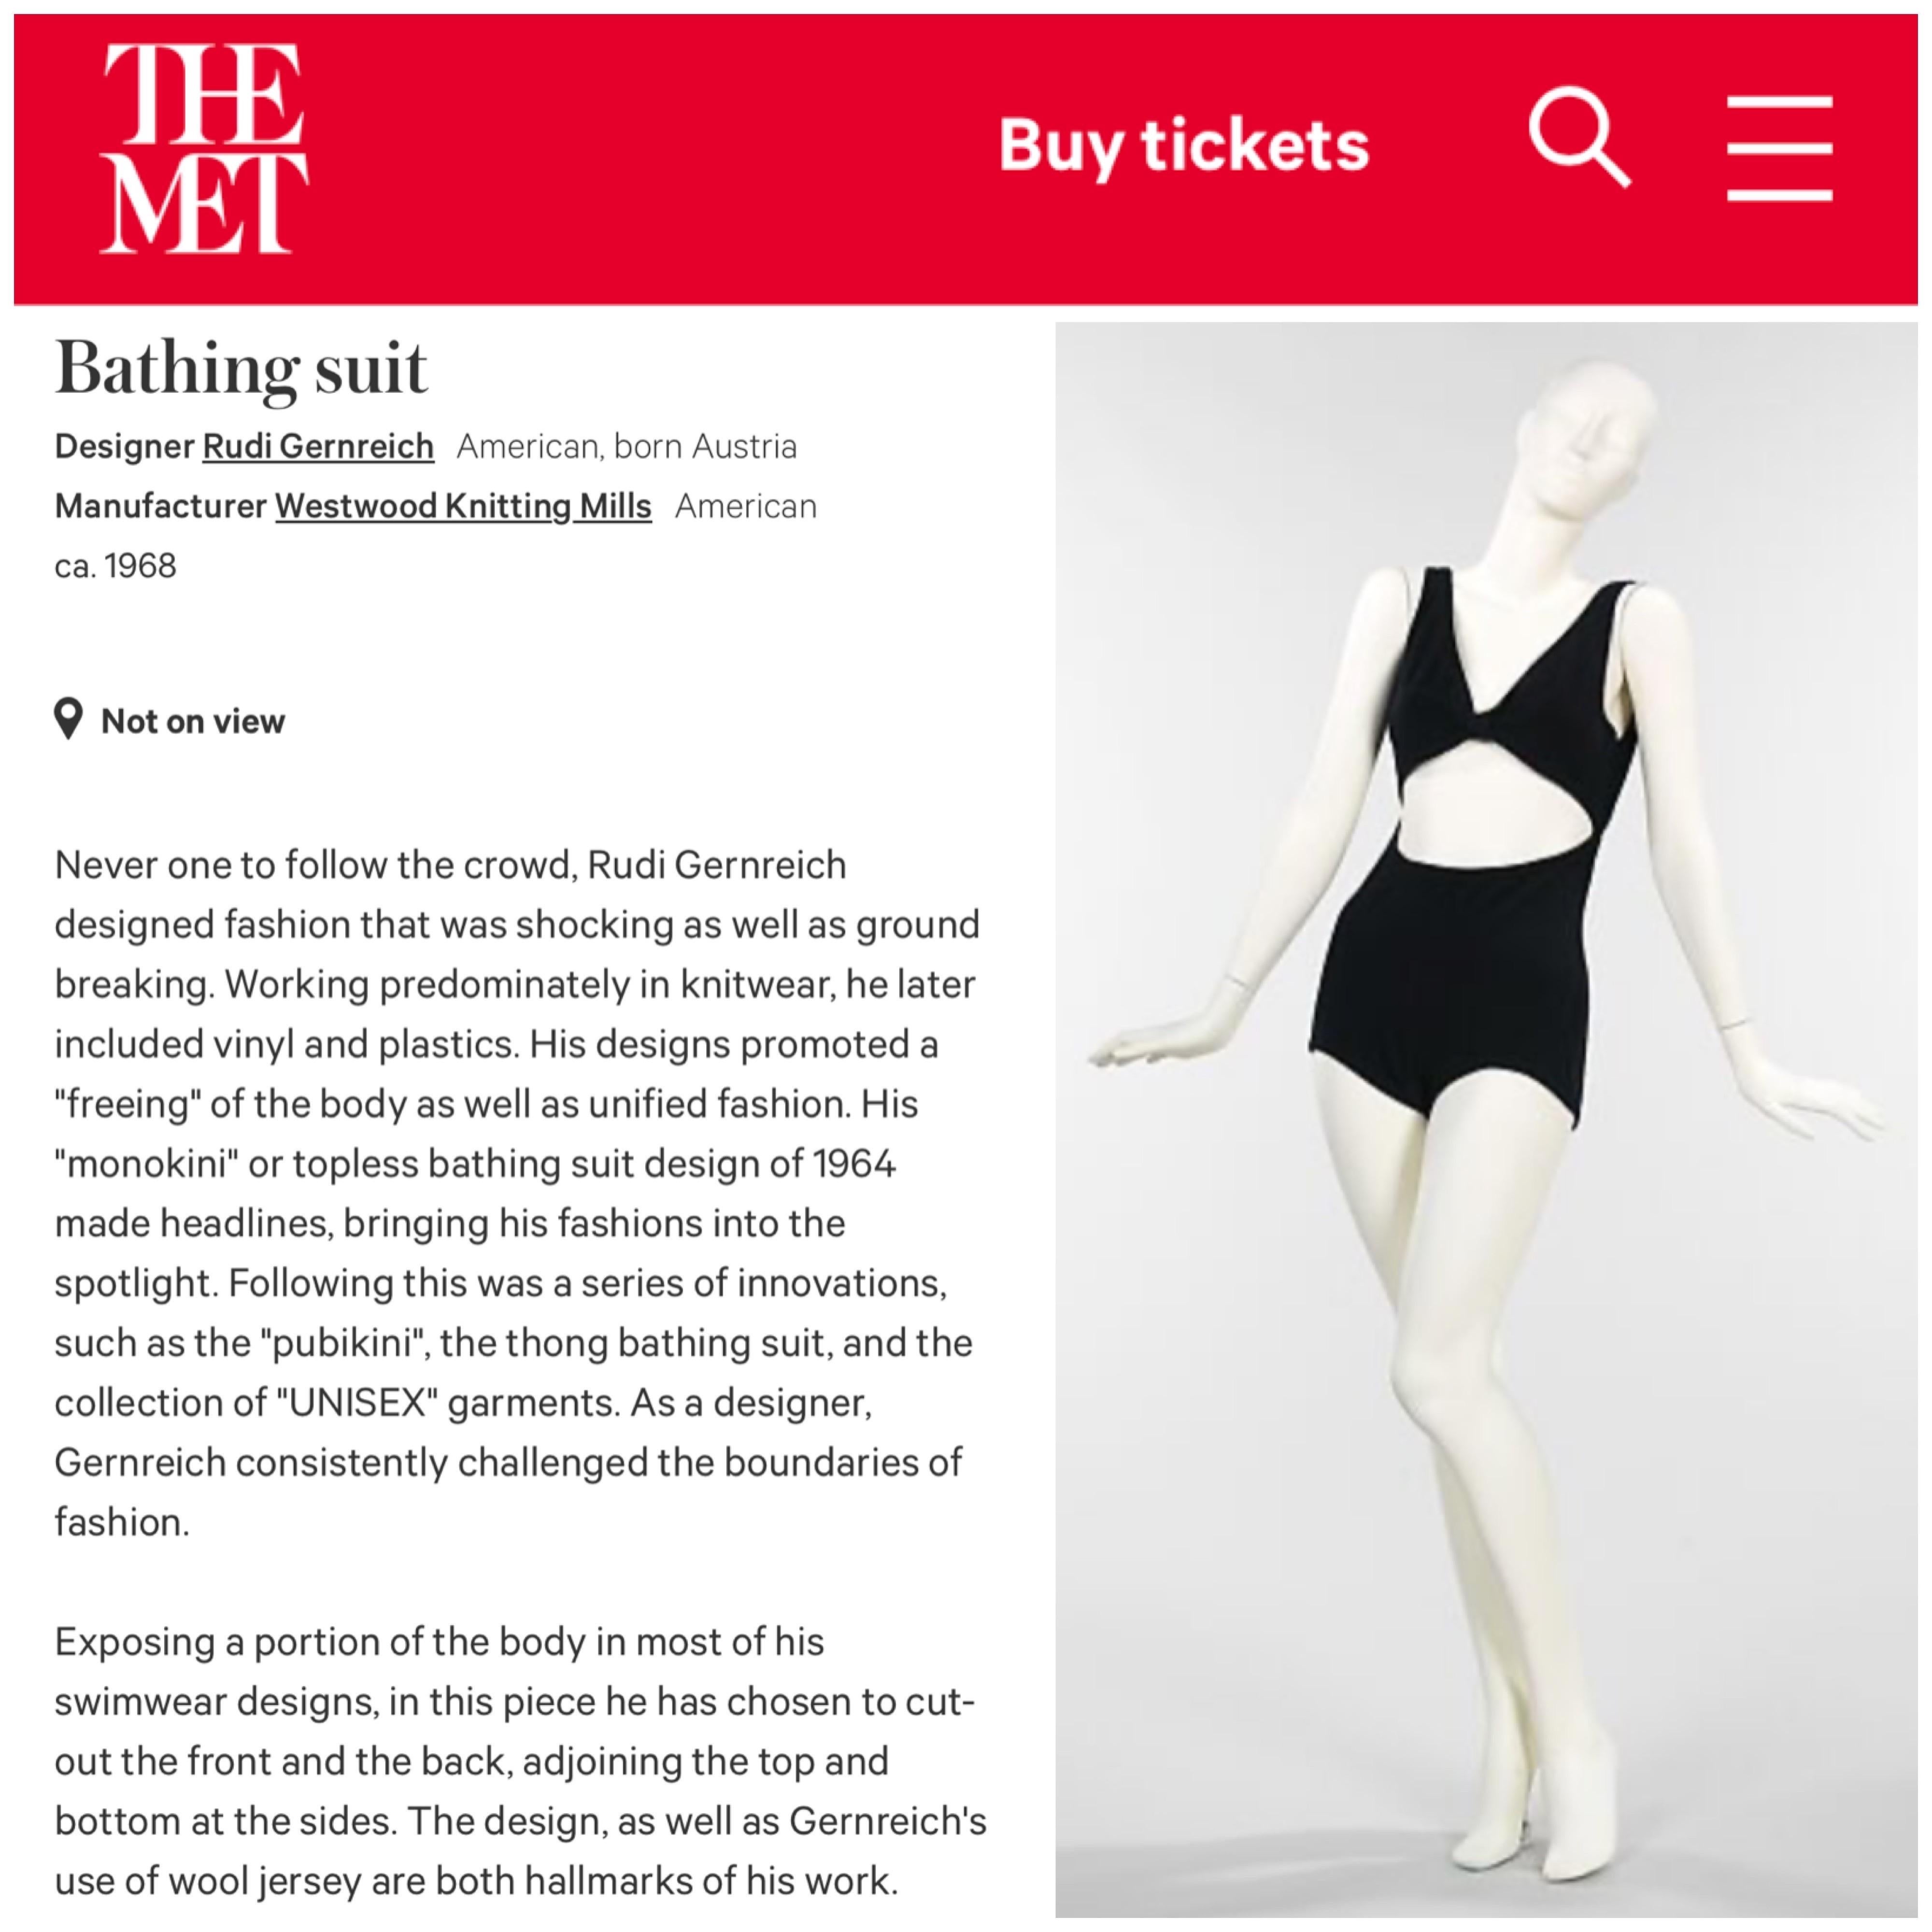 A highly coveted and museum-held Rudi Gernreich wool jersey cut-out swimsuit dating back to his 1968 collection. A fearless designer, Rudi Gernreich’s body conscious garments dazzled the fashion world with originality and vision. Gernreich held a